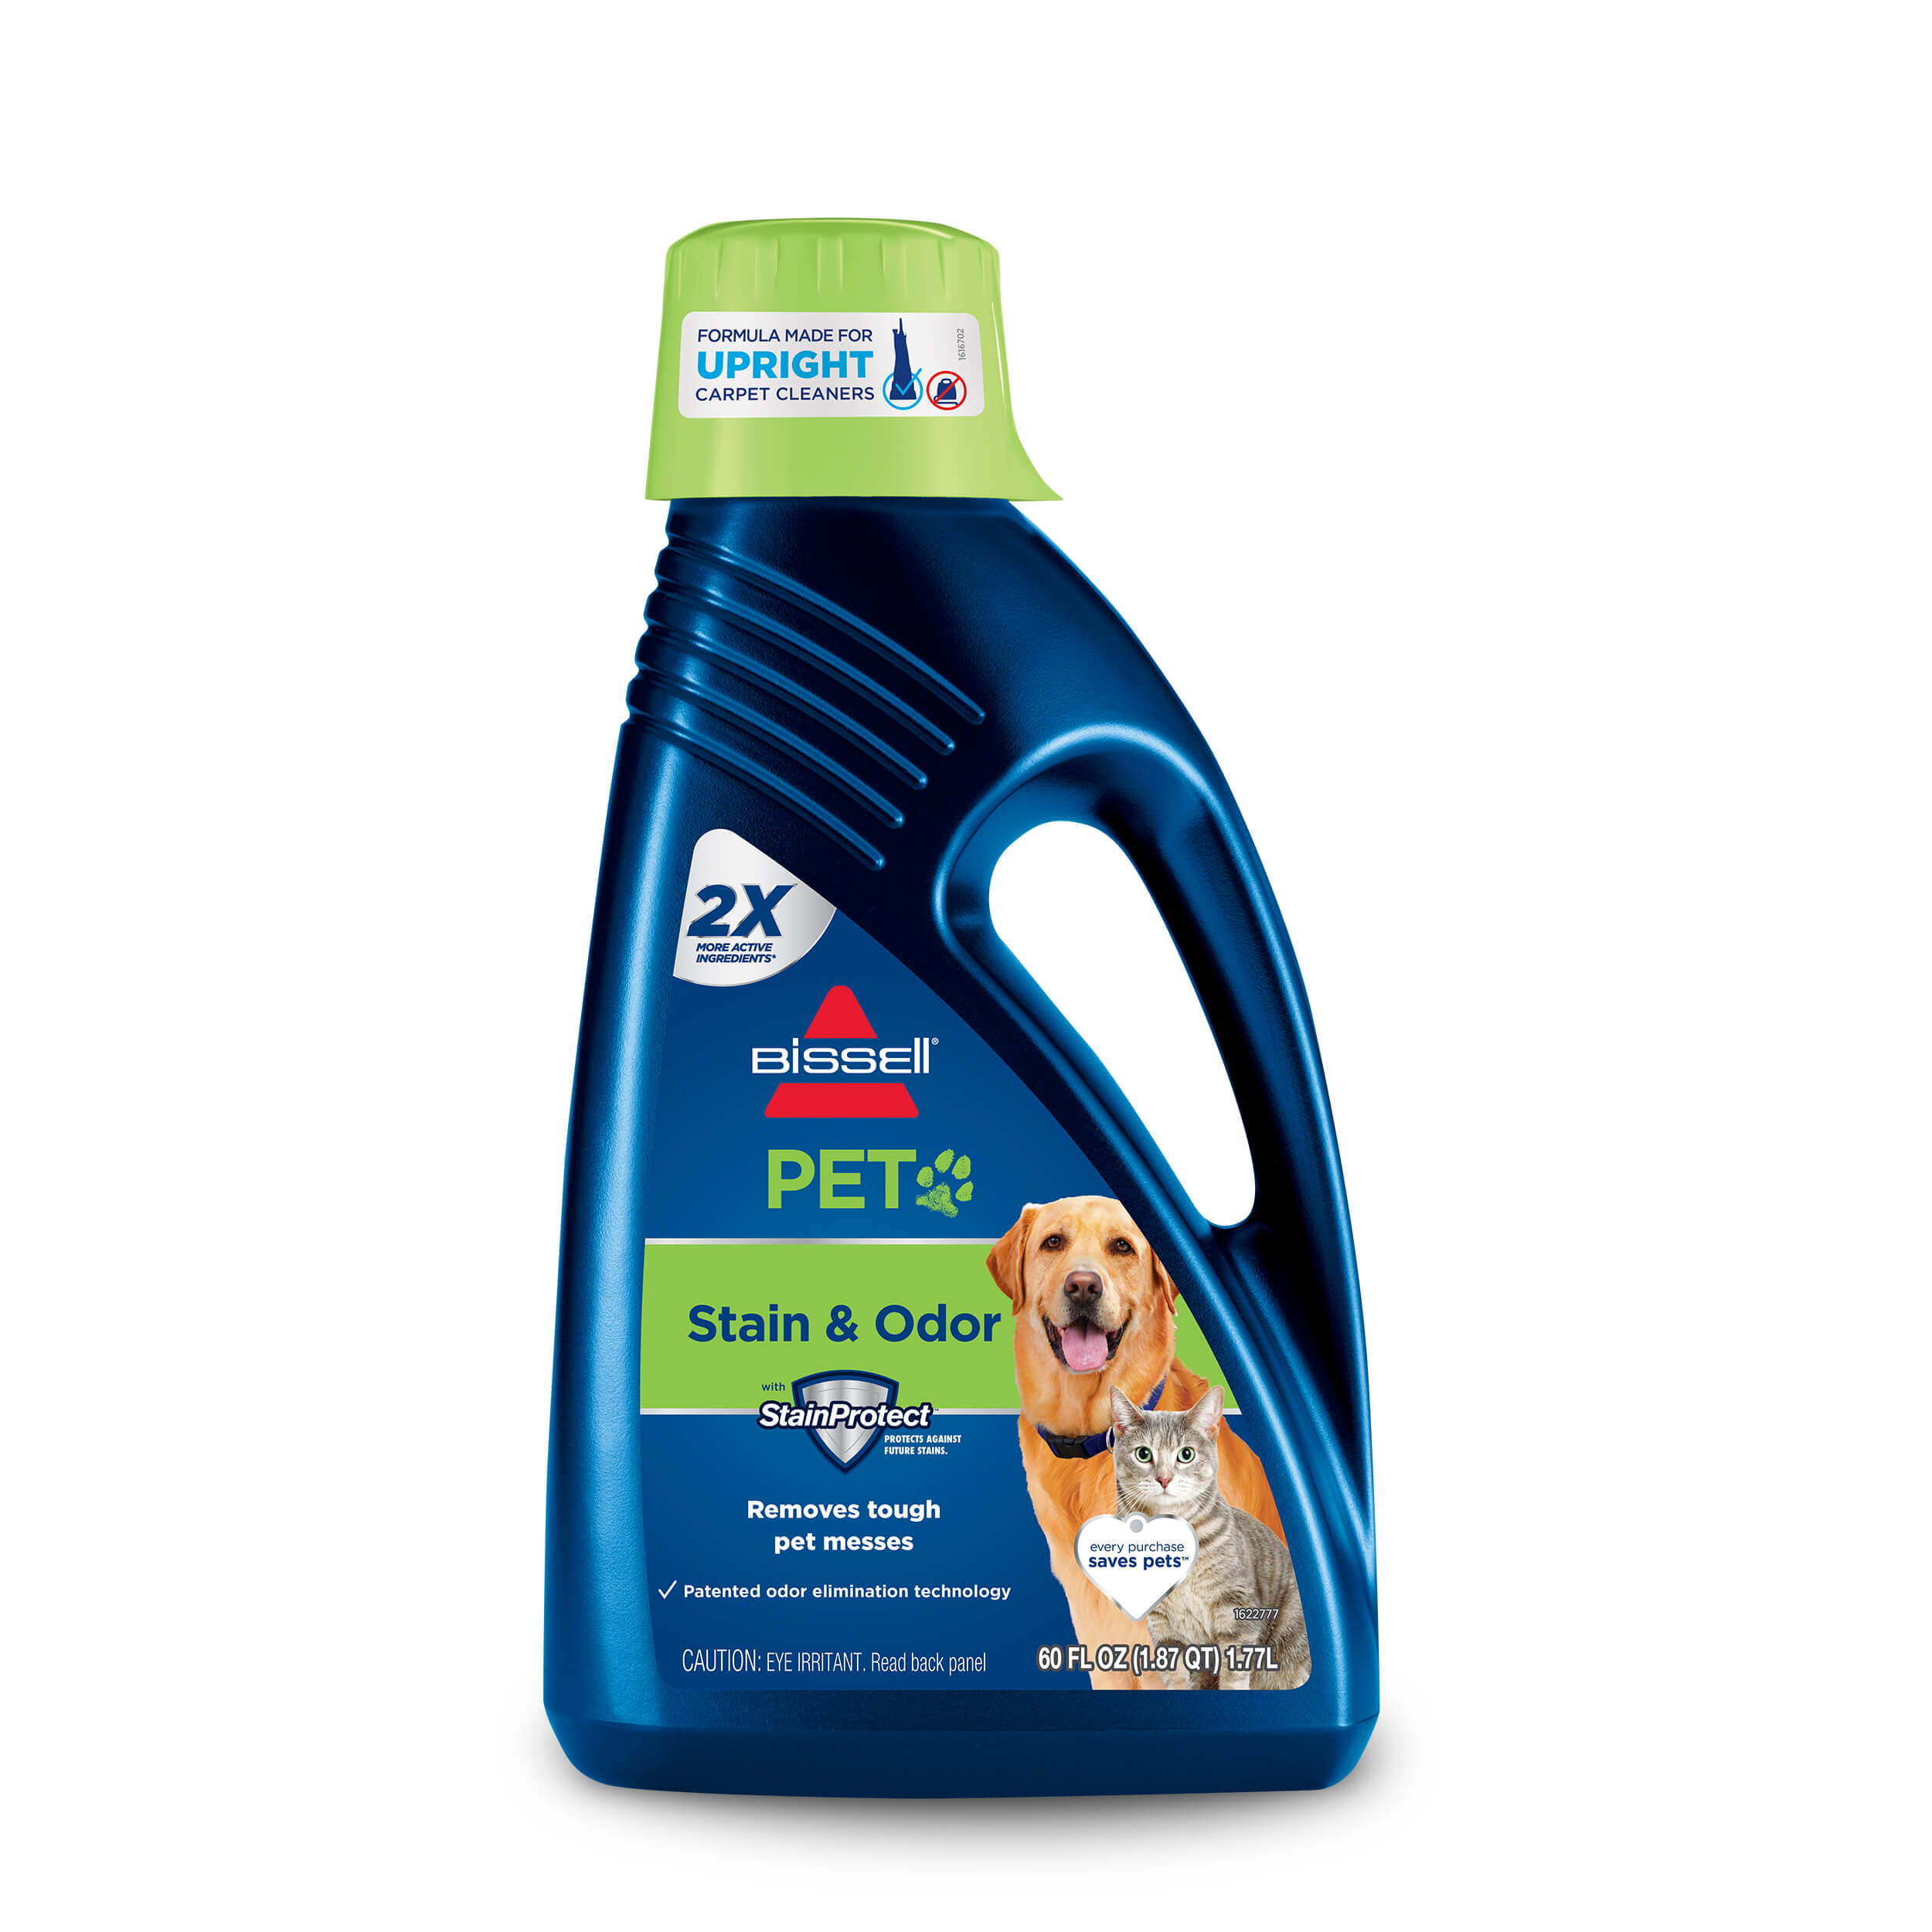 Pet Stain Carpet & Upholstery Cleaner